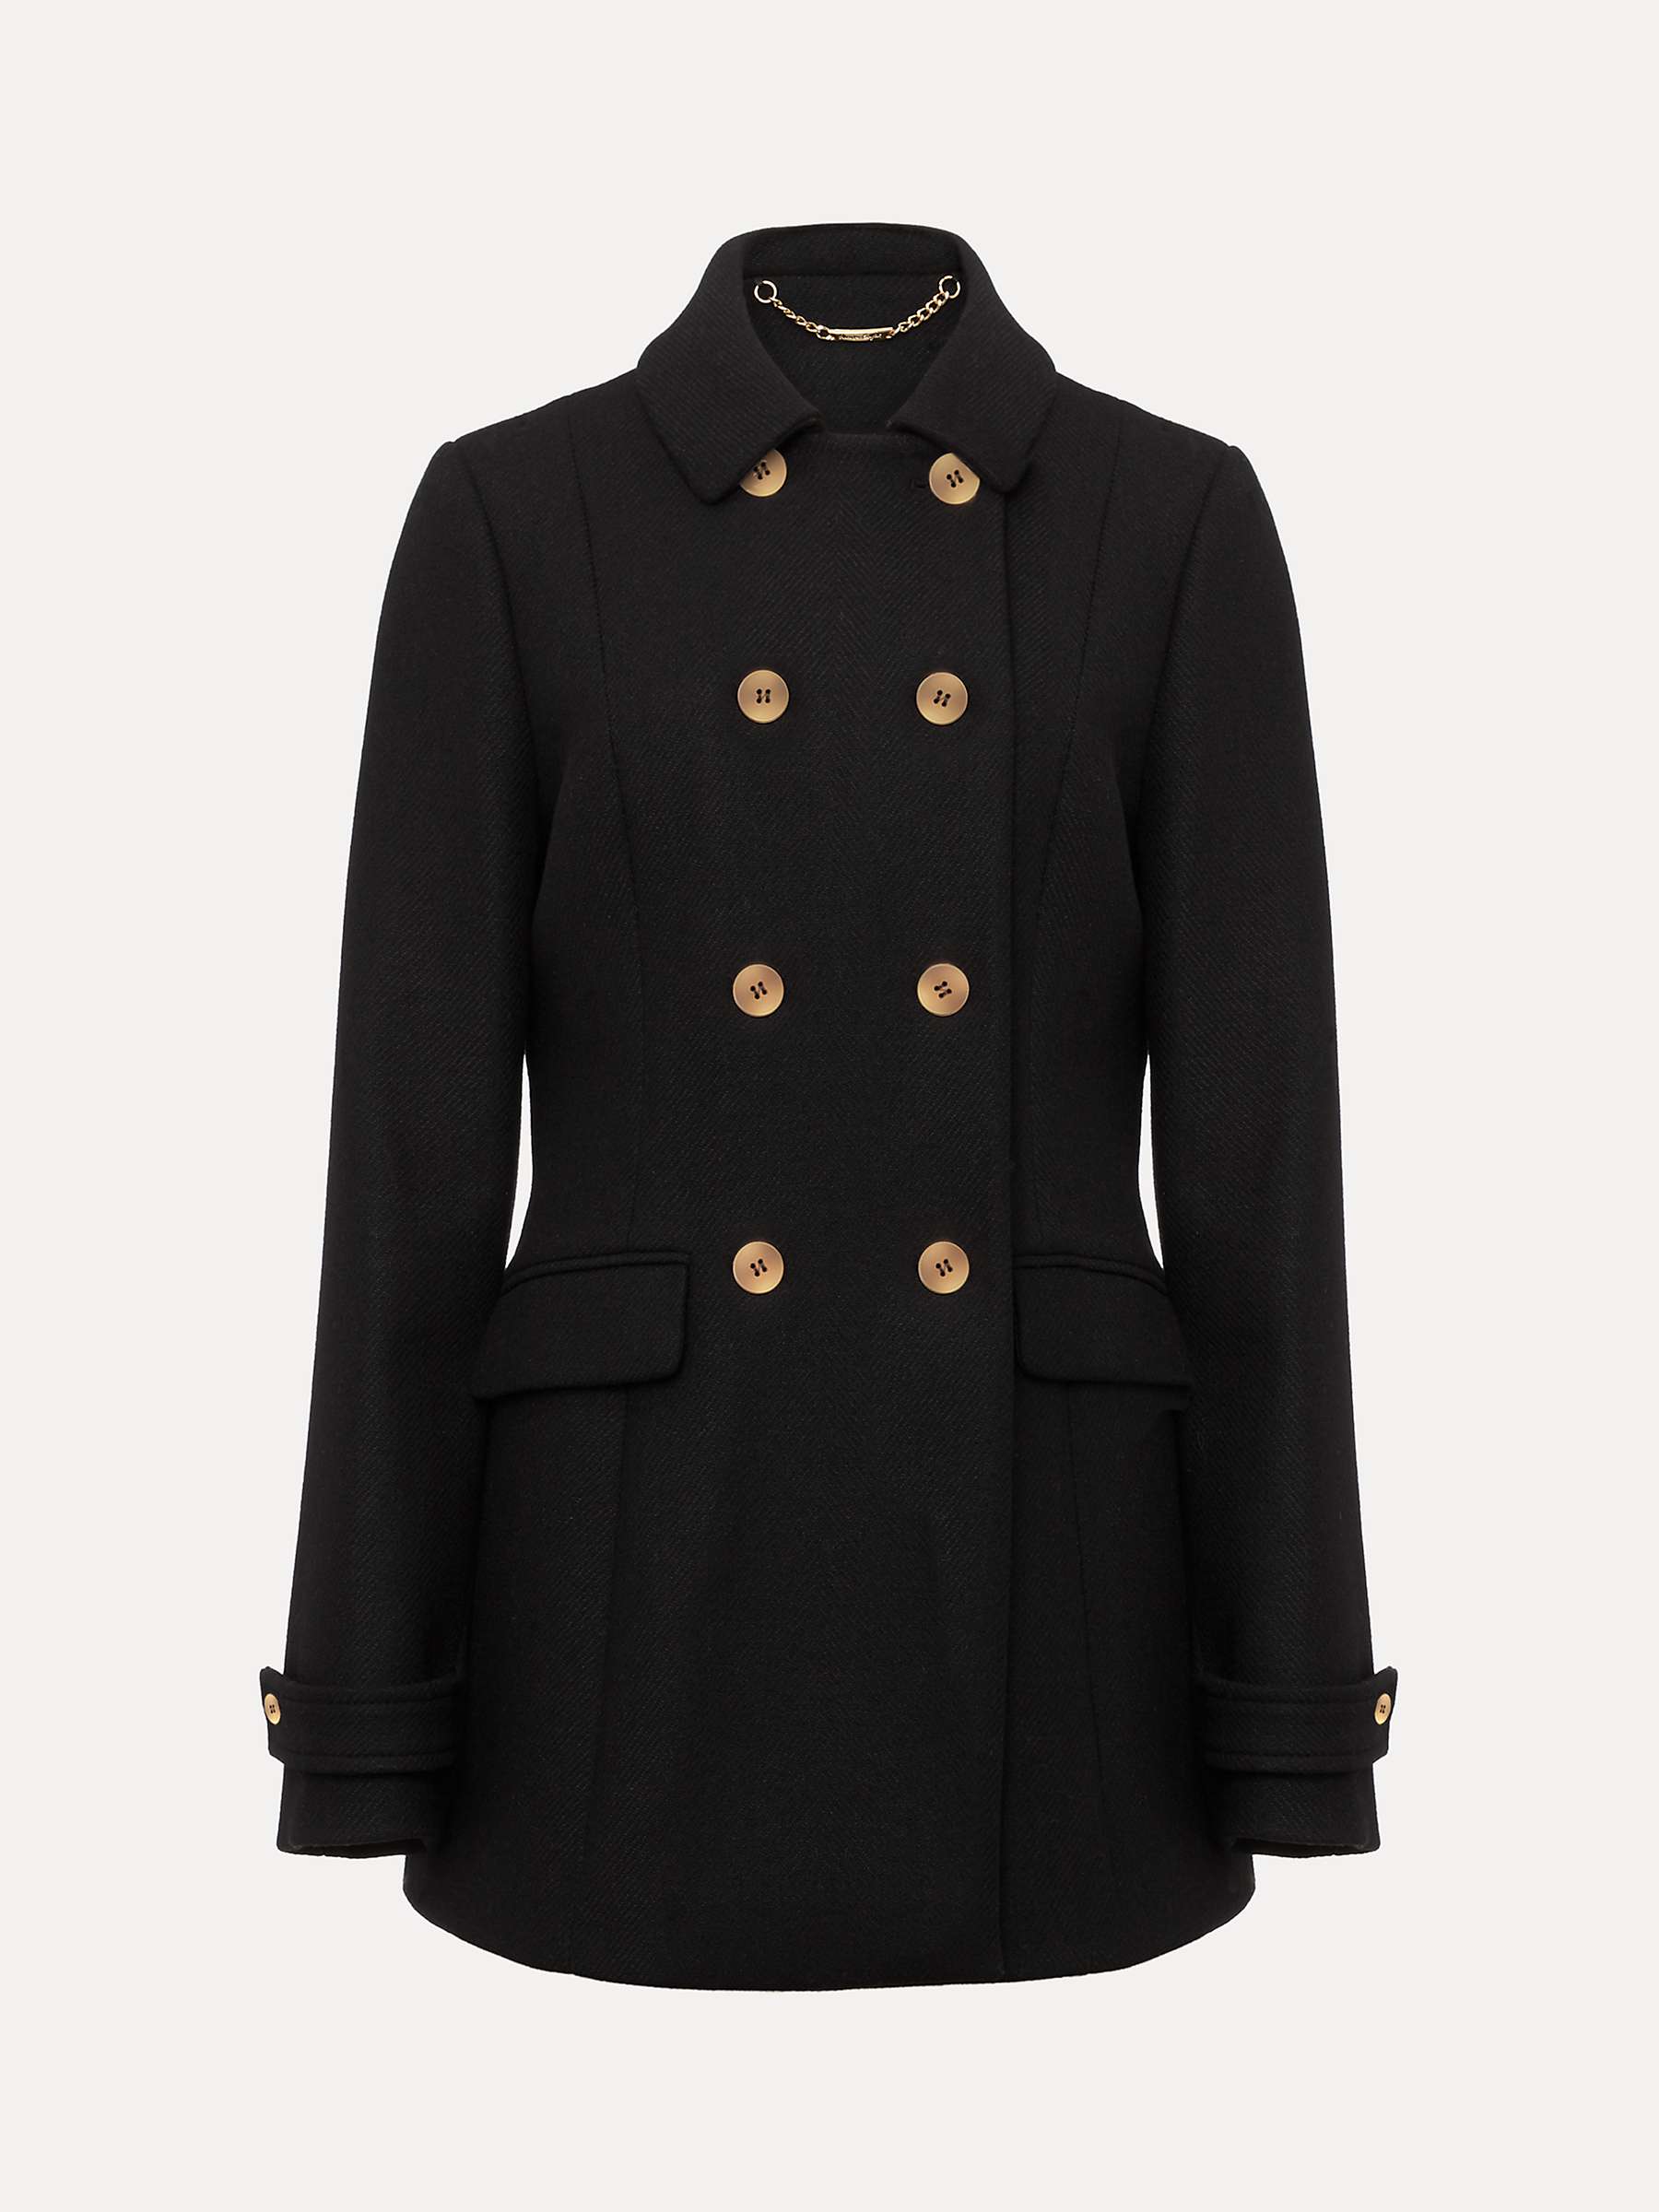 Buy Phase Eight Aurelie Double Breasted Wool Blend Peacoat, Black Online at johnlewis.com